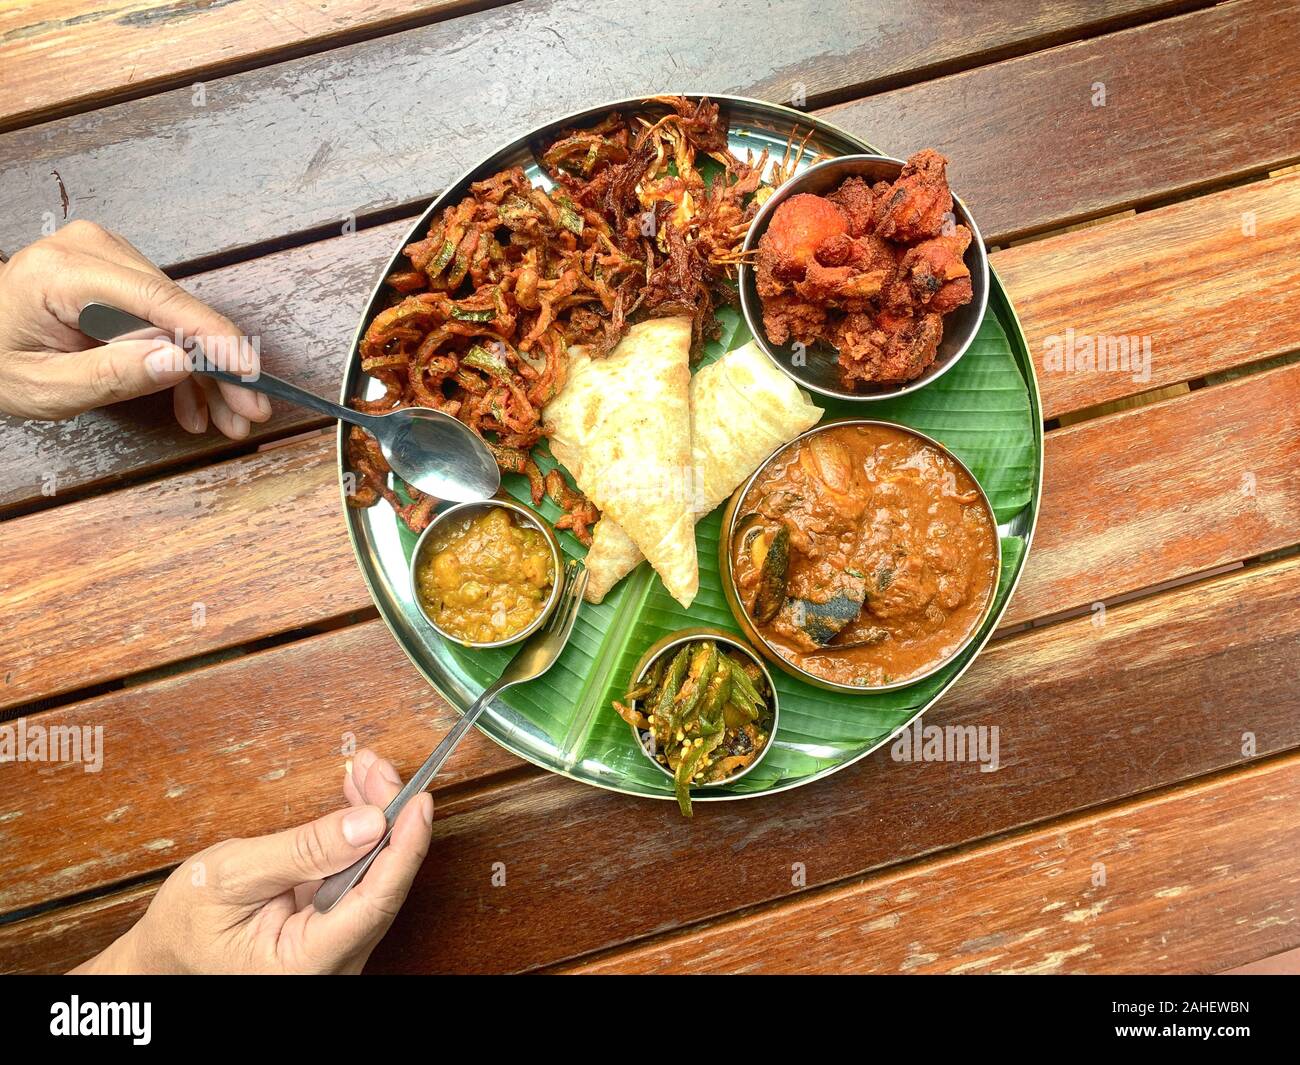 Man using fork and spoon to eat banana leaf dish, consists of fried chicken, curry seafood, lady fingerspotatoes and canai Stock Photo